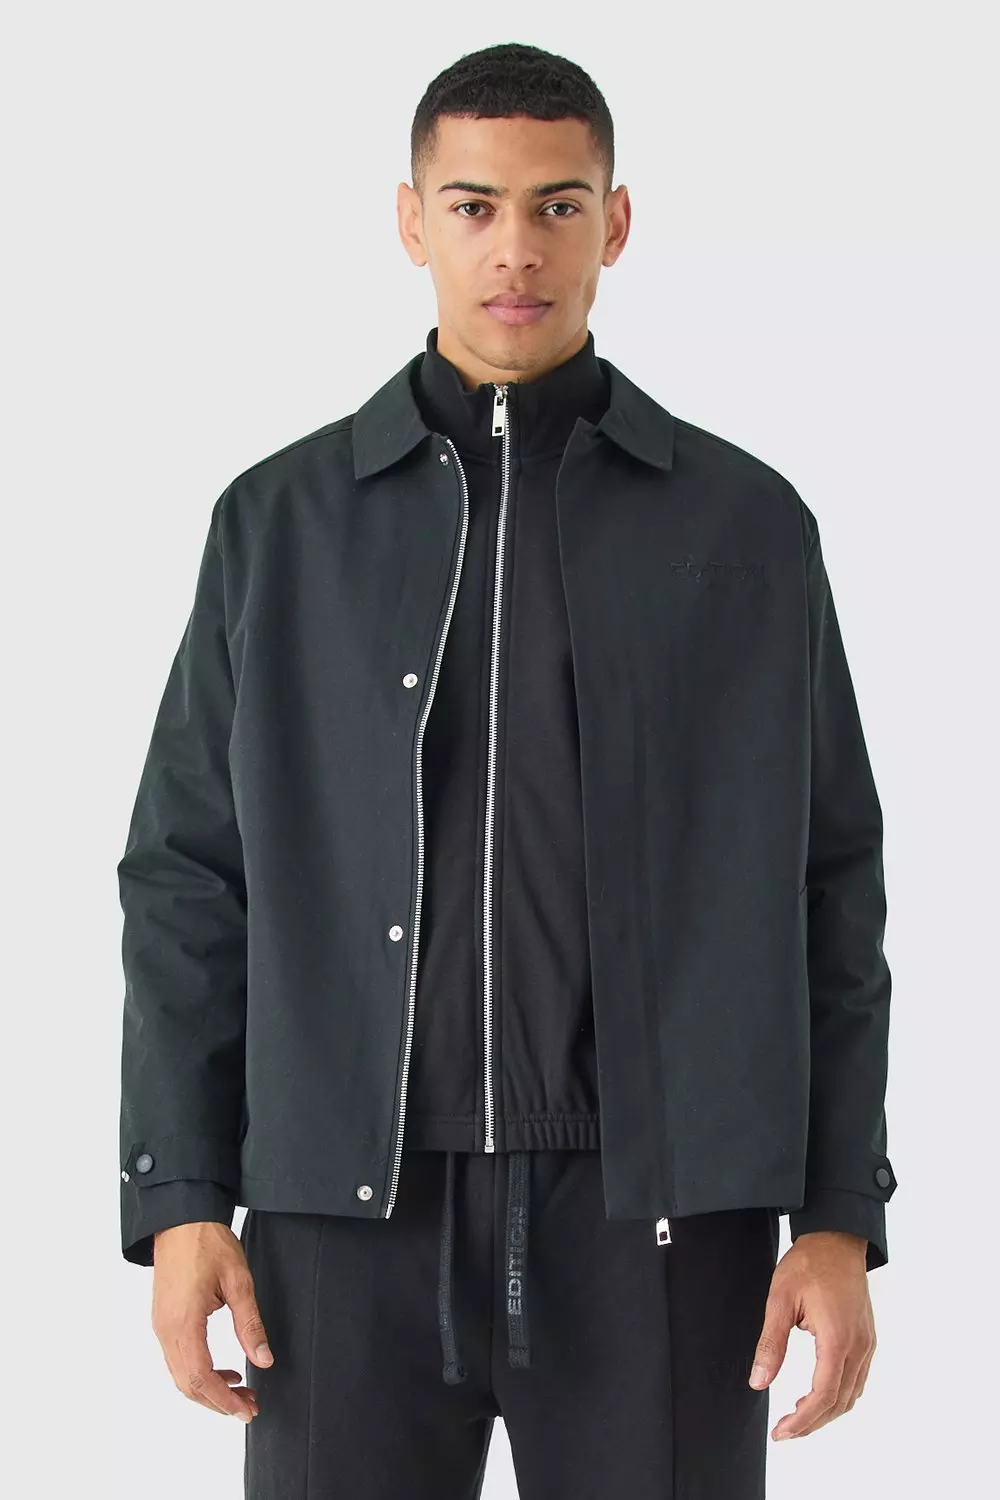 Black Heavyweight Twill Embroidered Coach Jacket